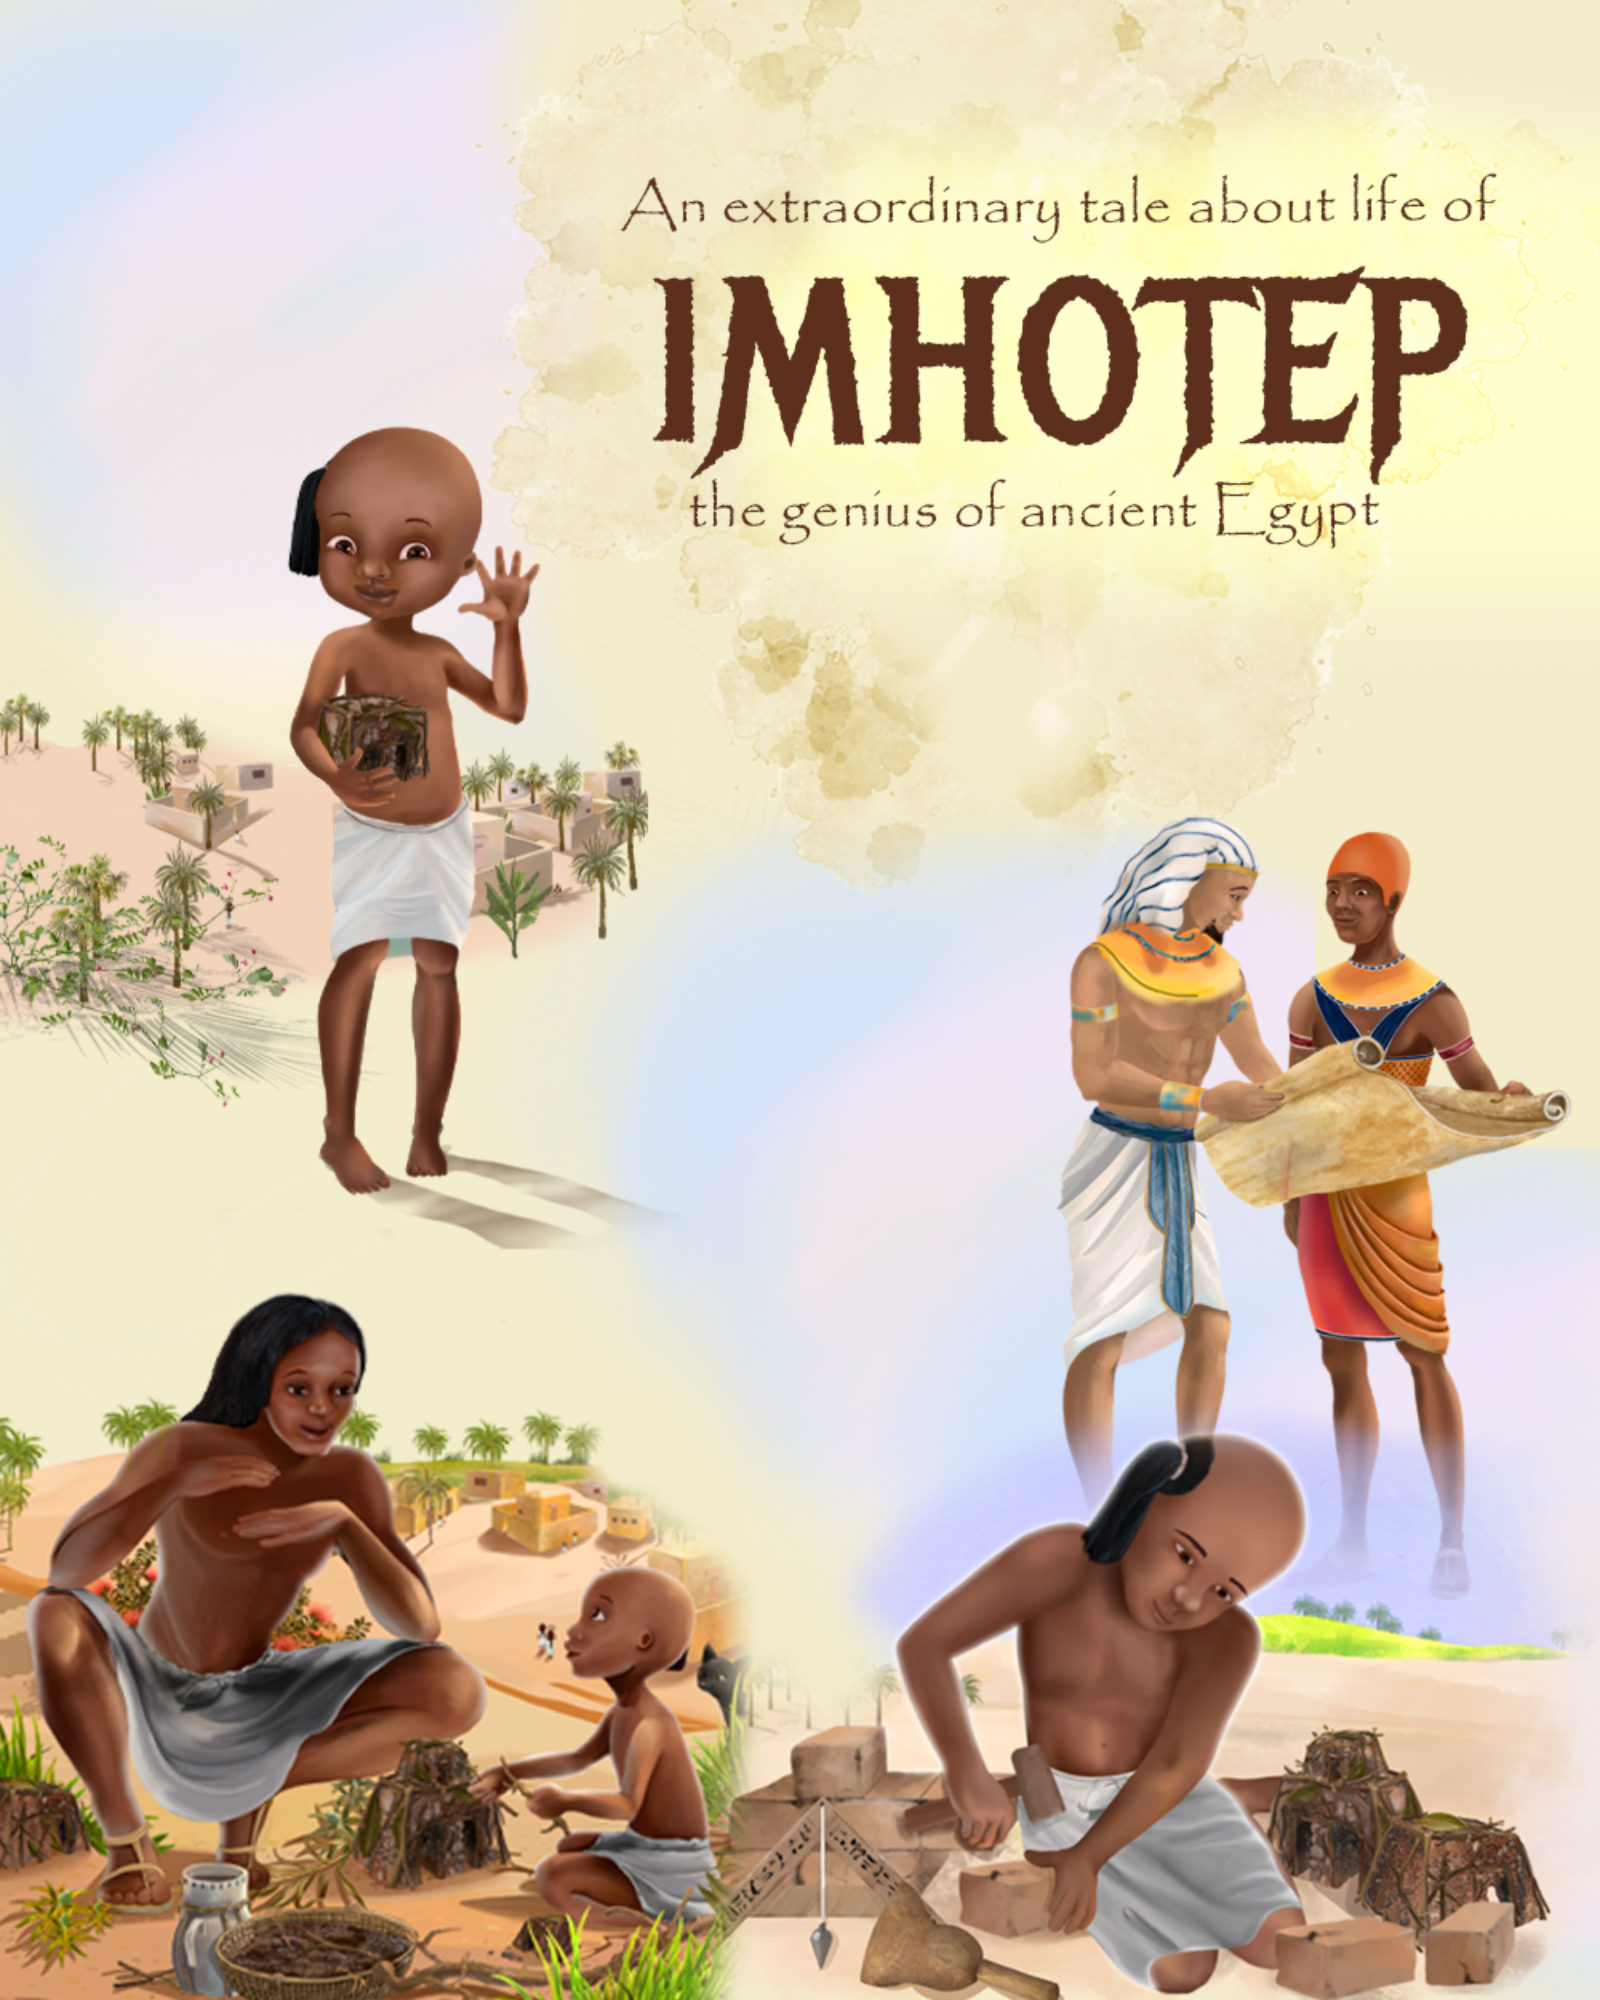 Imhotep of Ancient Kemet